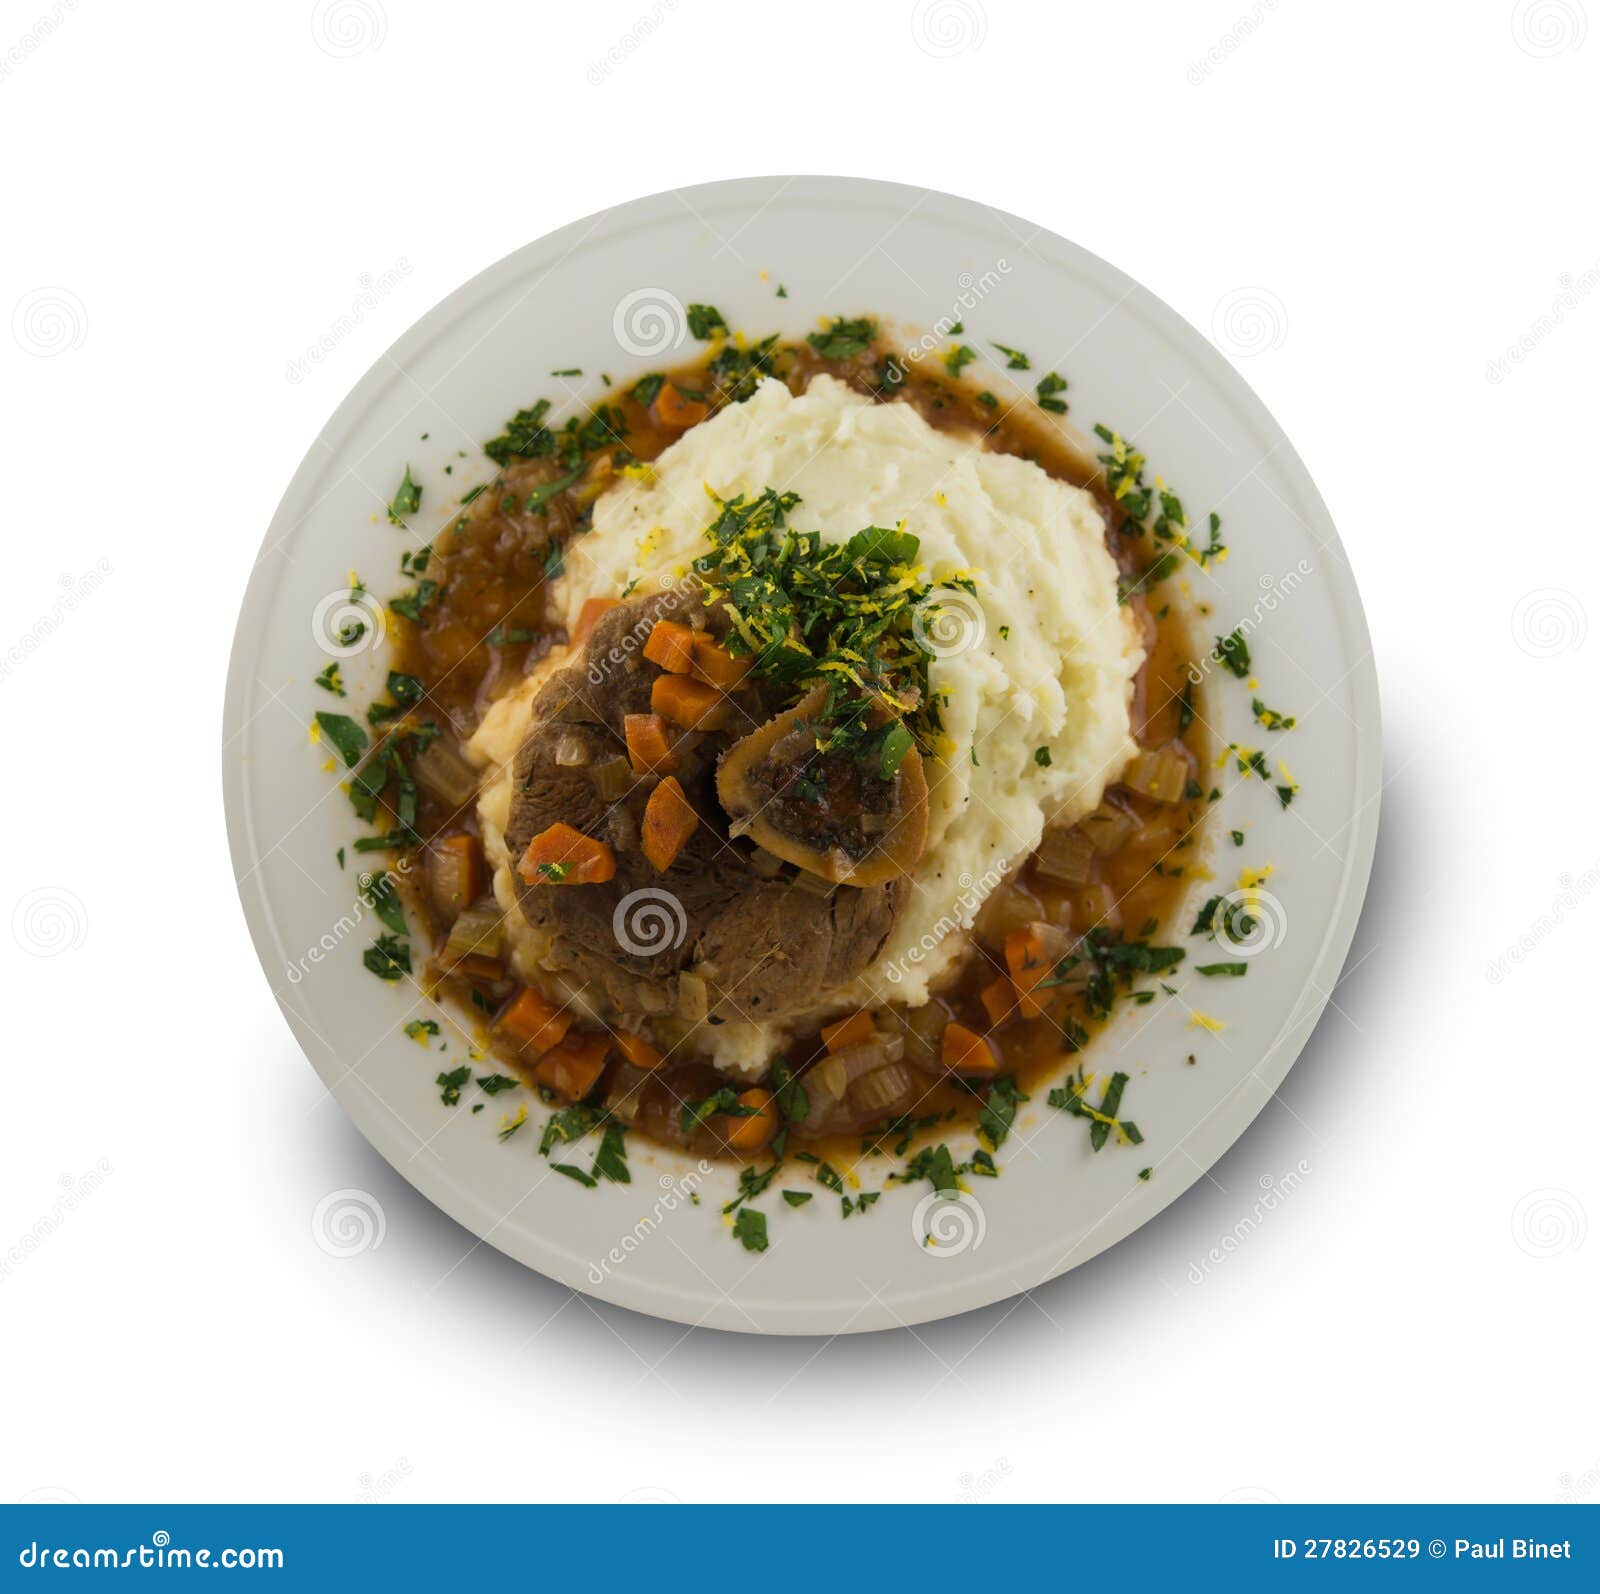  osso buco meal on white background.